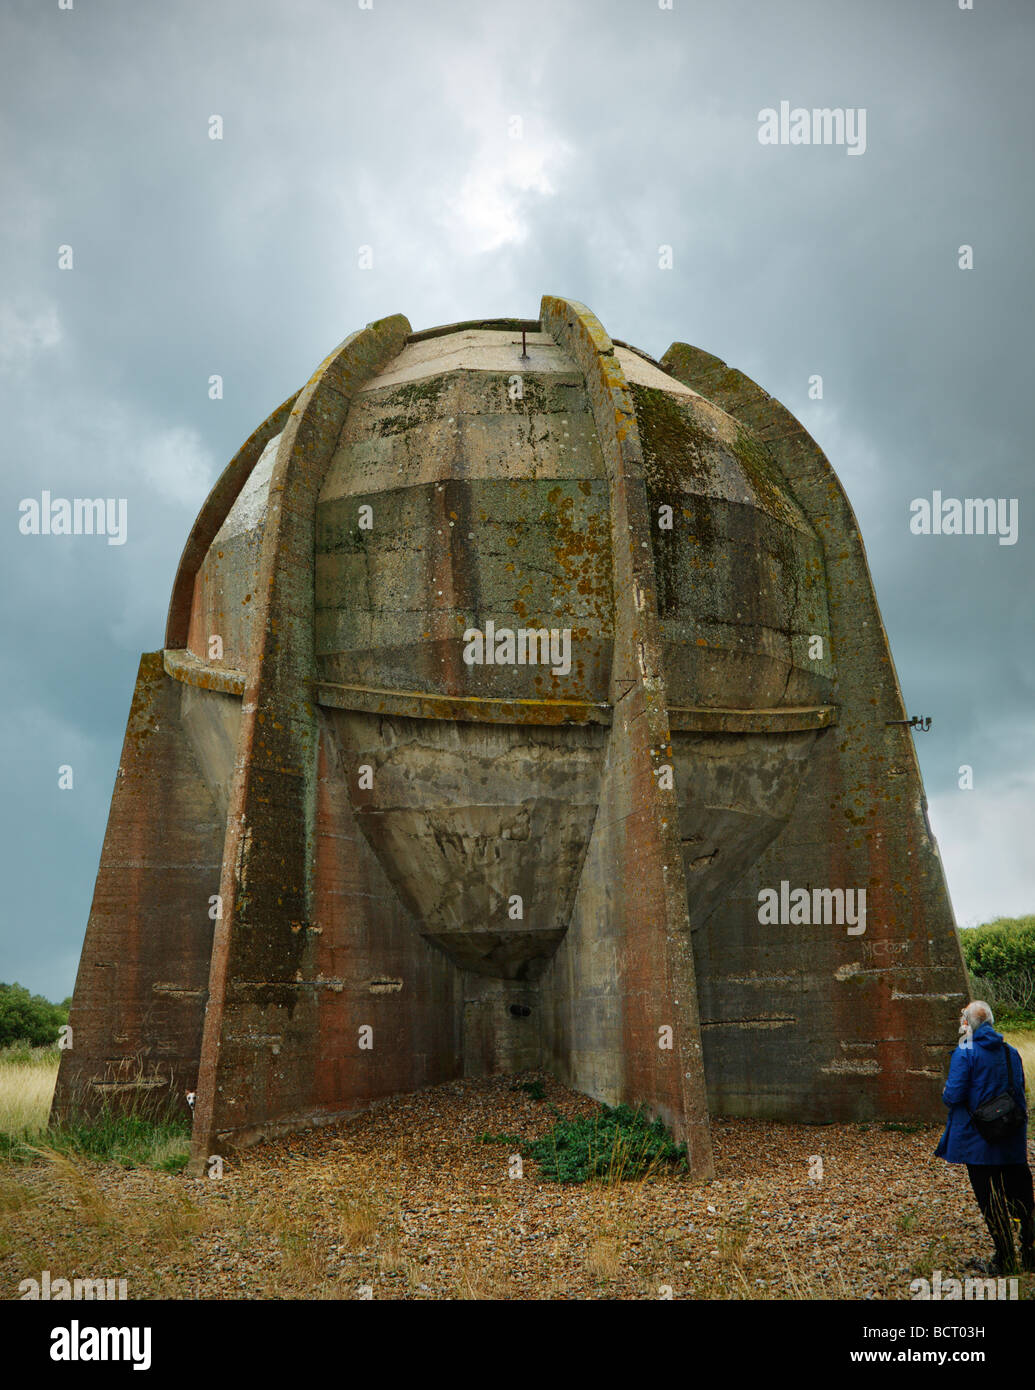 The rear of the 30 foot sound mirror at Denge, Romney, Kent, England, UK. Stock Photo